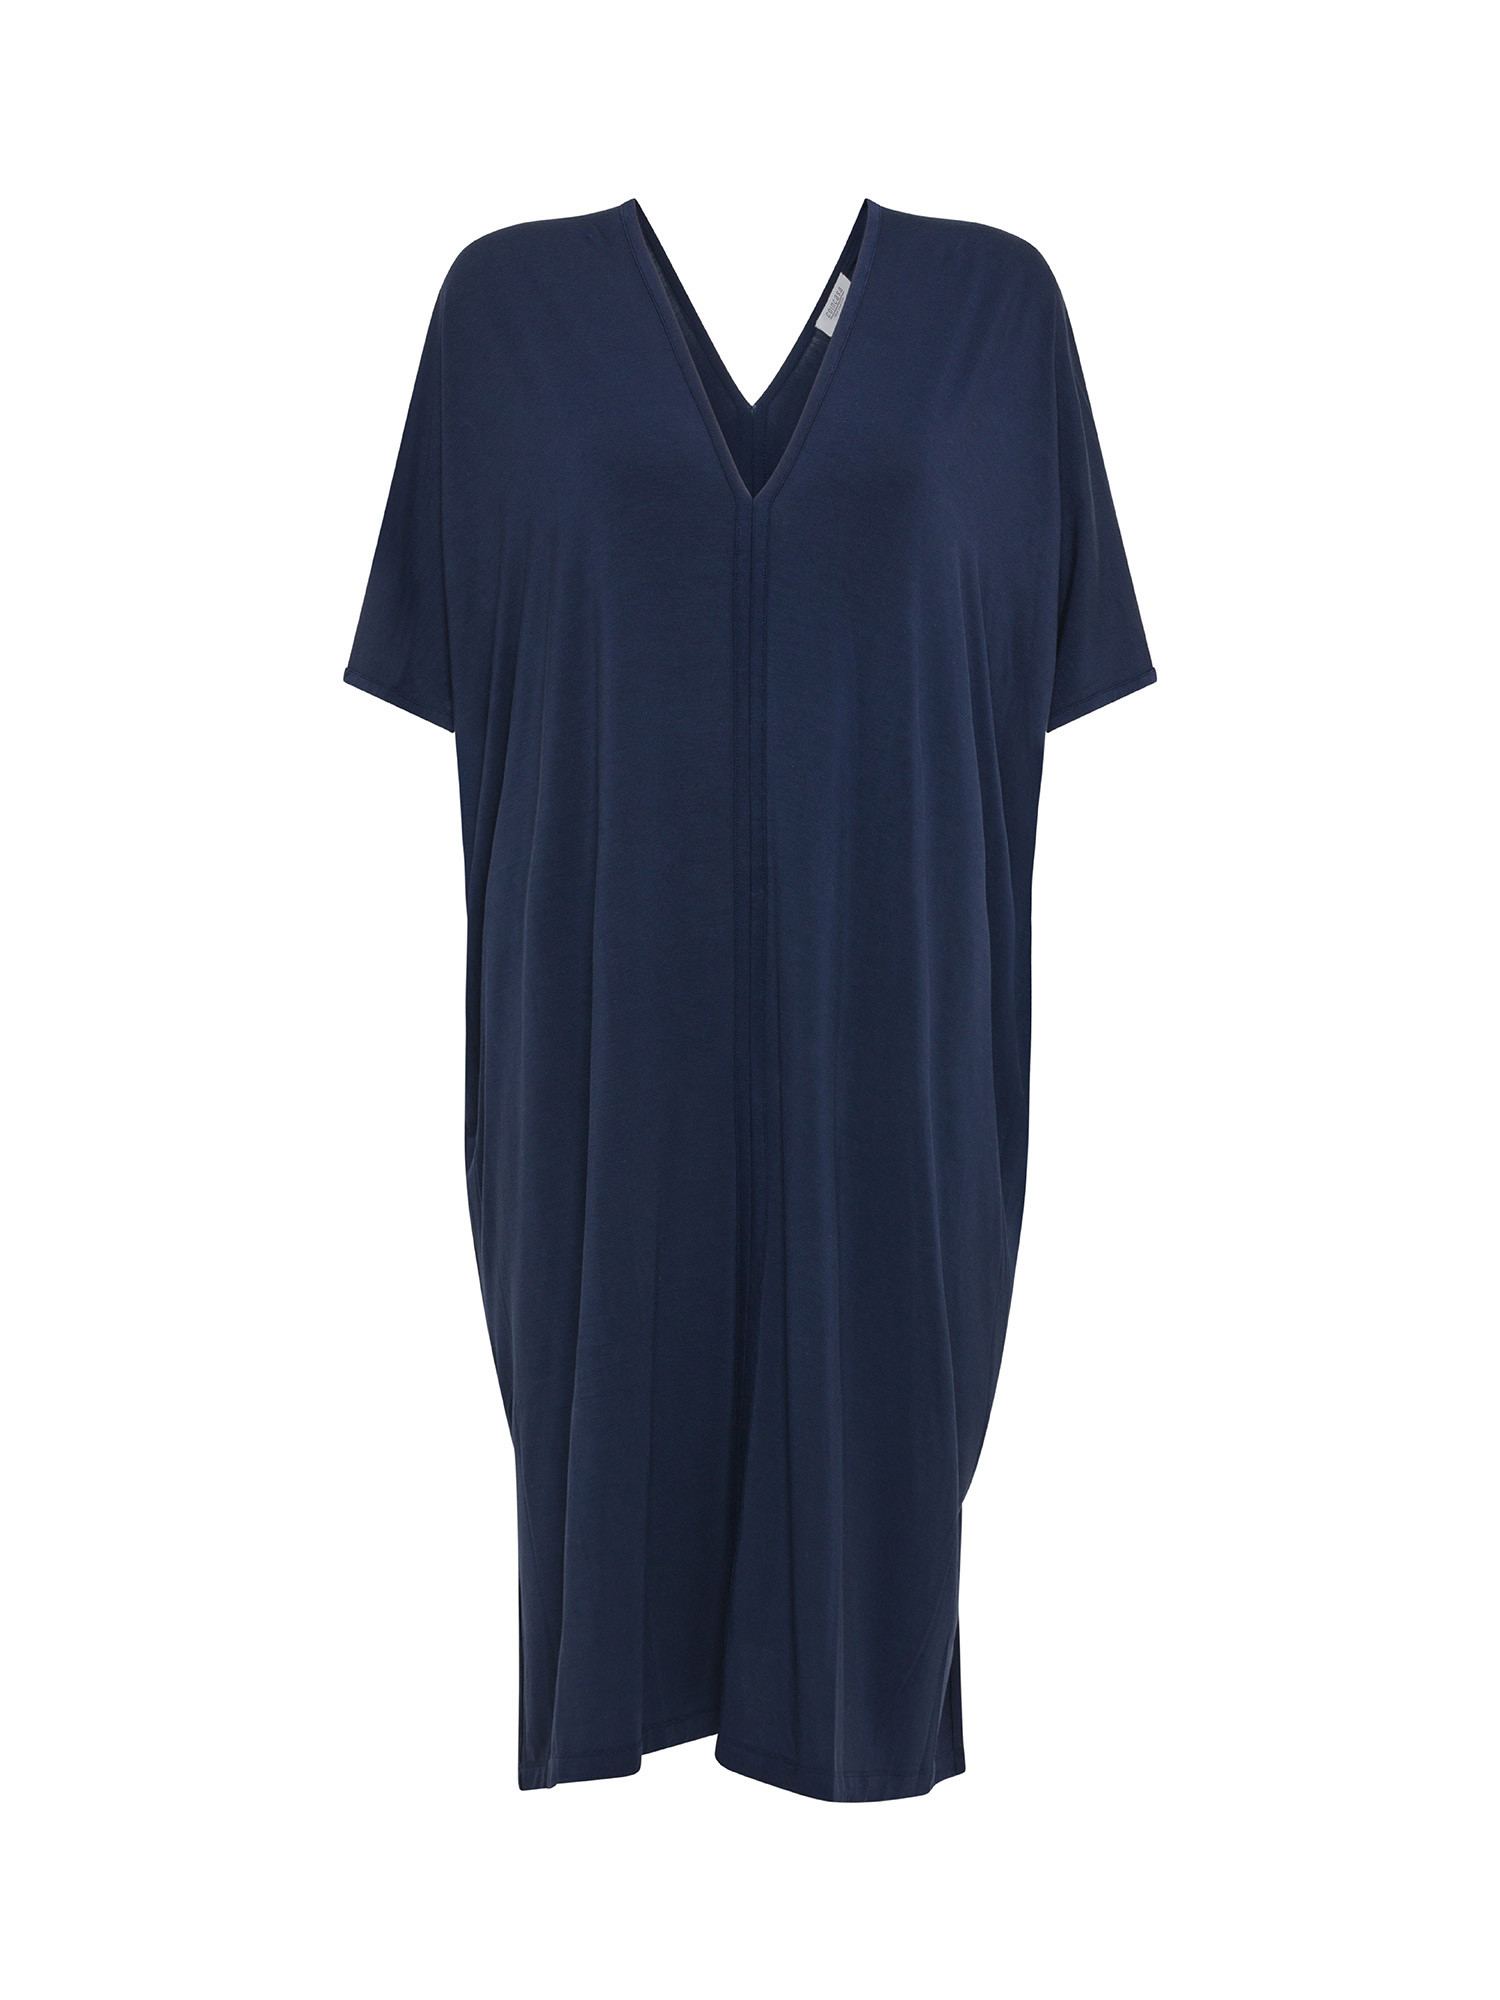 Vestito in viscosa di bamboo., Blue Navy, large image number 0